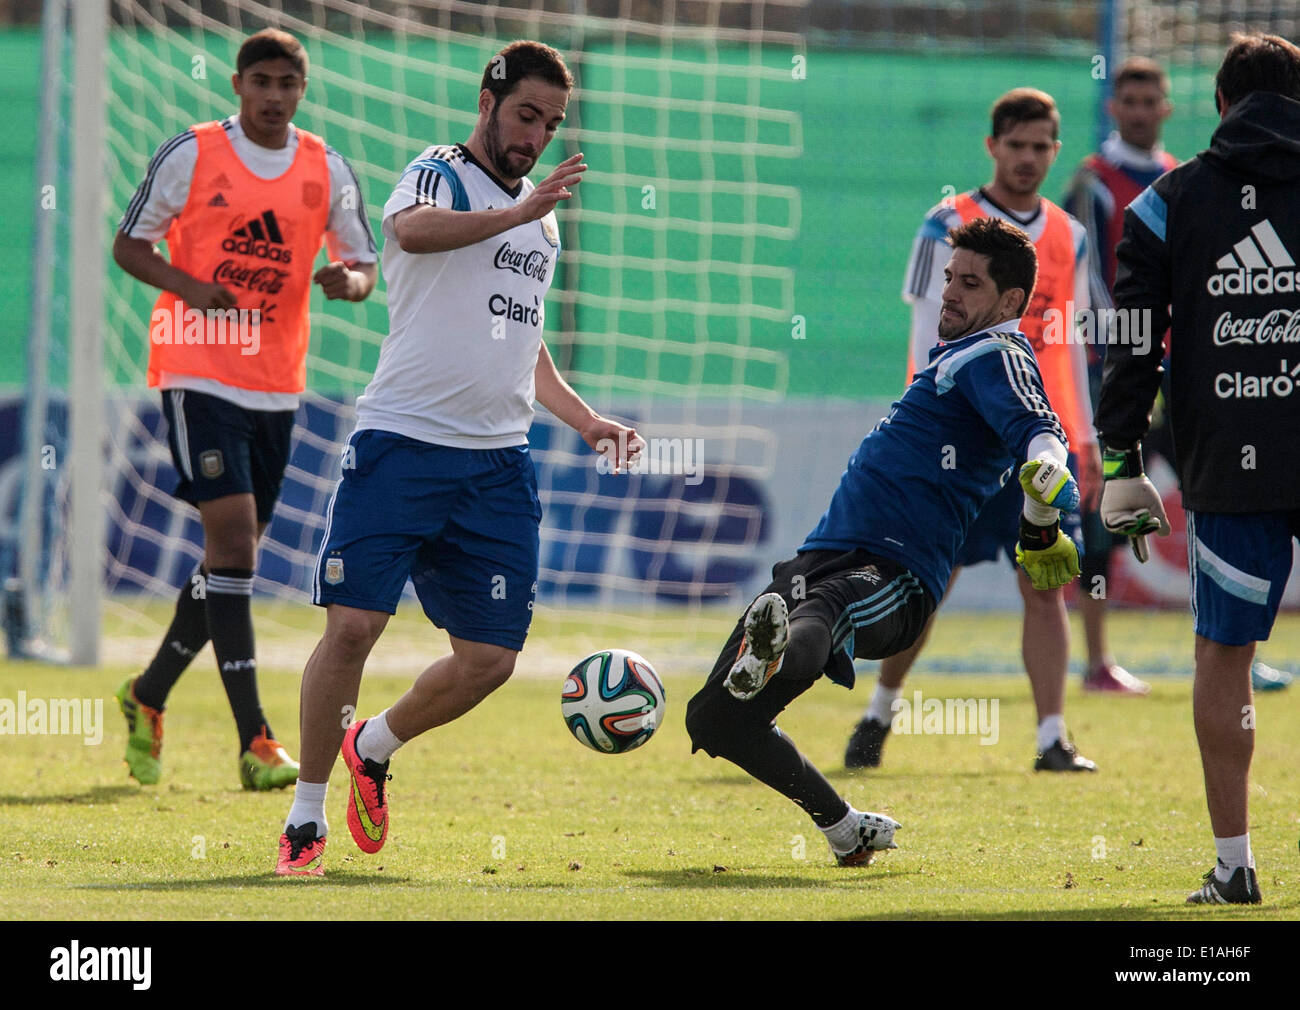 Ezeiza. 28th May, 2014. Gonzalo Higuain (L Front) and goalkeeper Agustin Orion (2nd R Front) participate in a training session in Ezeiza City May 28, 2014. Argentina will face Trinidad and Tobago and Slovenia in friendly matches prior to the FIFA World Cup Brazil 2014, to be held from June 12 to July 13. © Martin Zabala/Xinhua/Alamy Live News Stock Photo